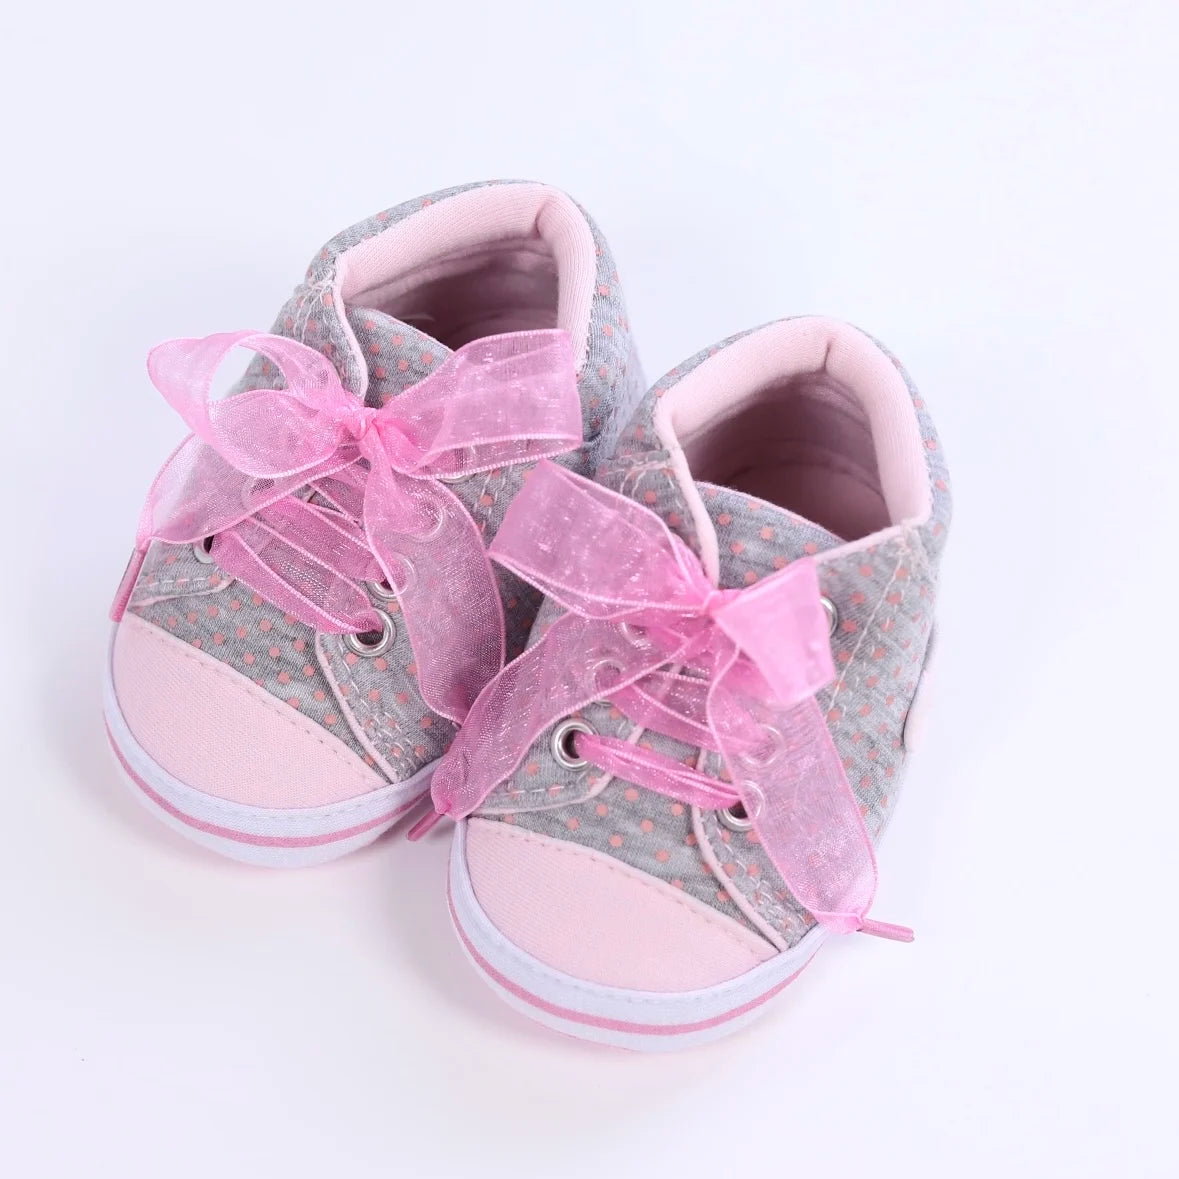 "Baby Girls Sneakers - Cute Bowknot Design, Lightweight & Non-Slip, Ideal for Indoor and Outdoor Walking during Spring and Autumn"